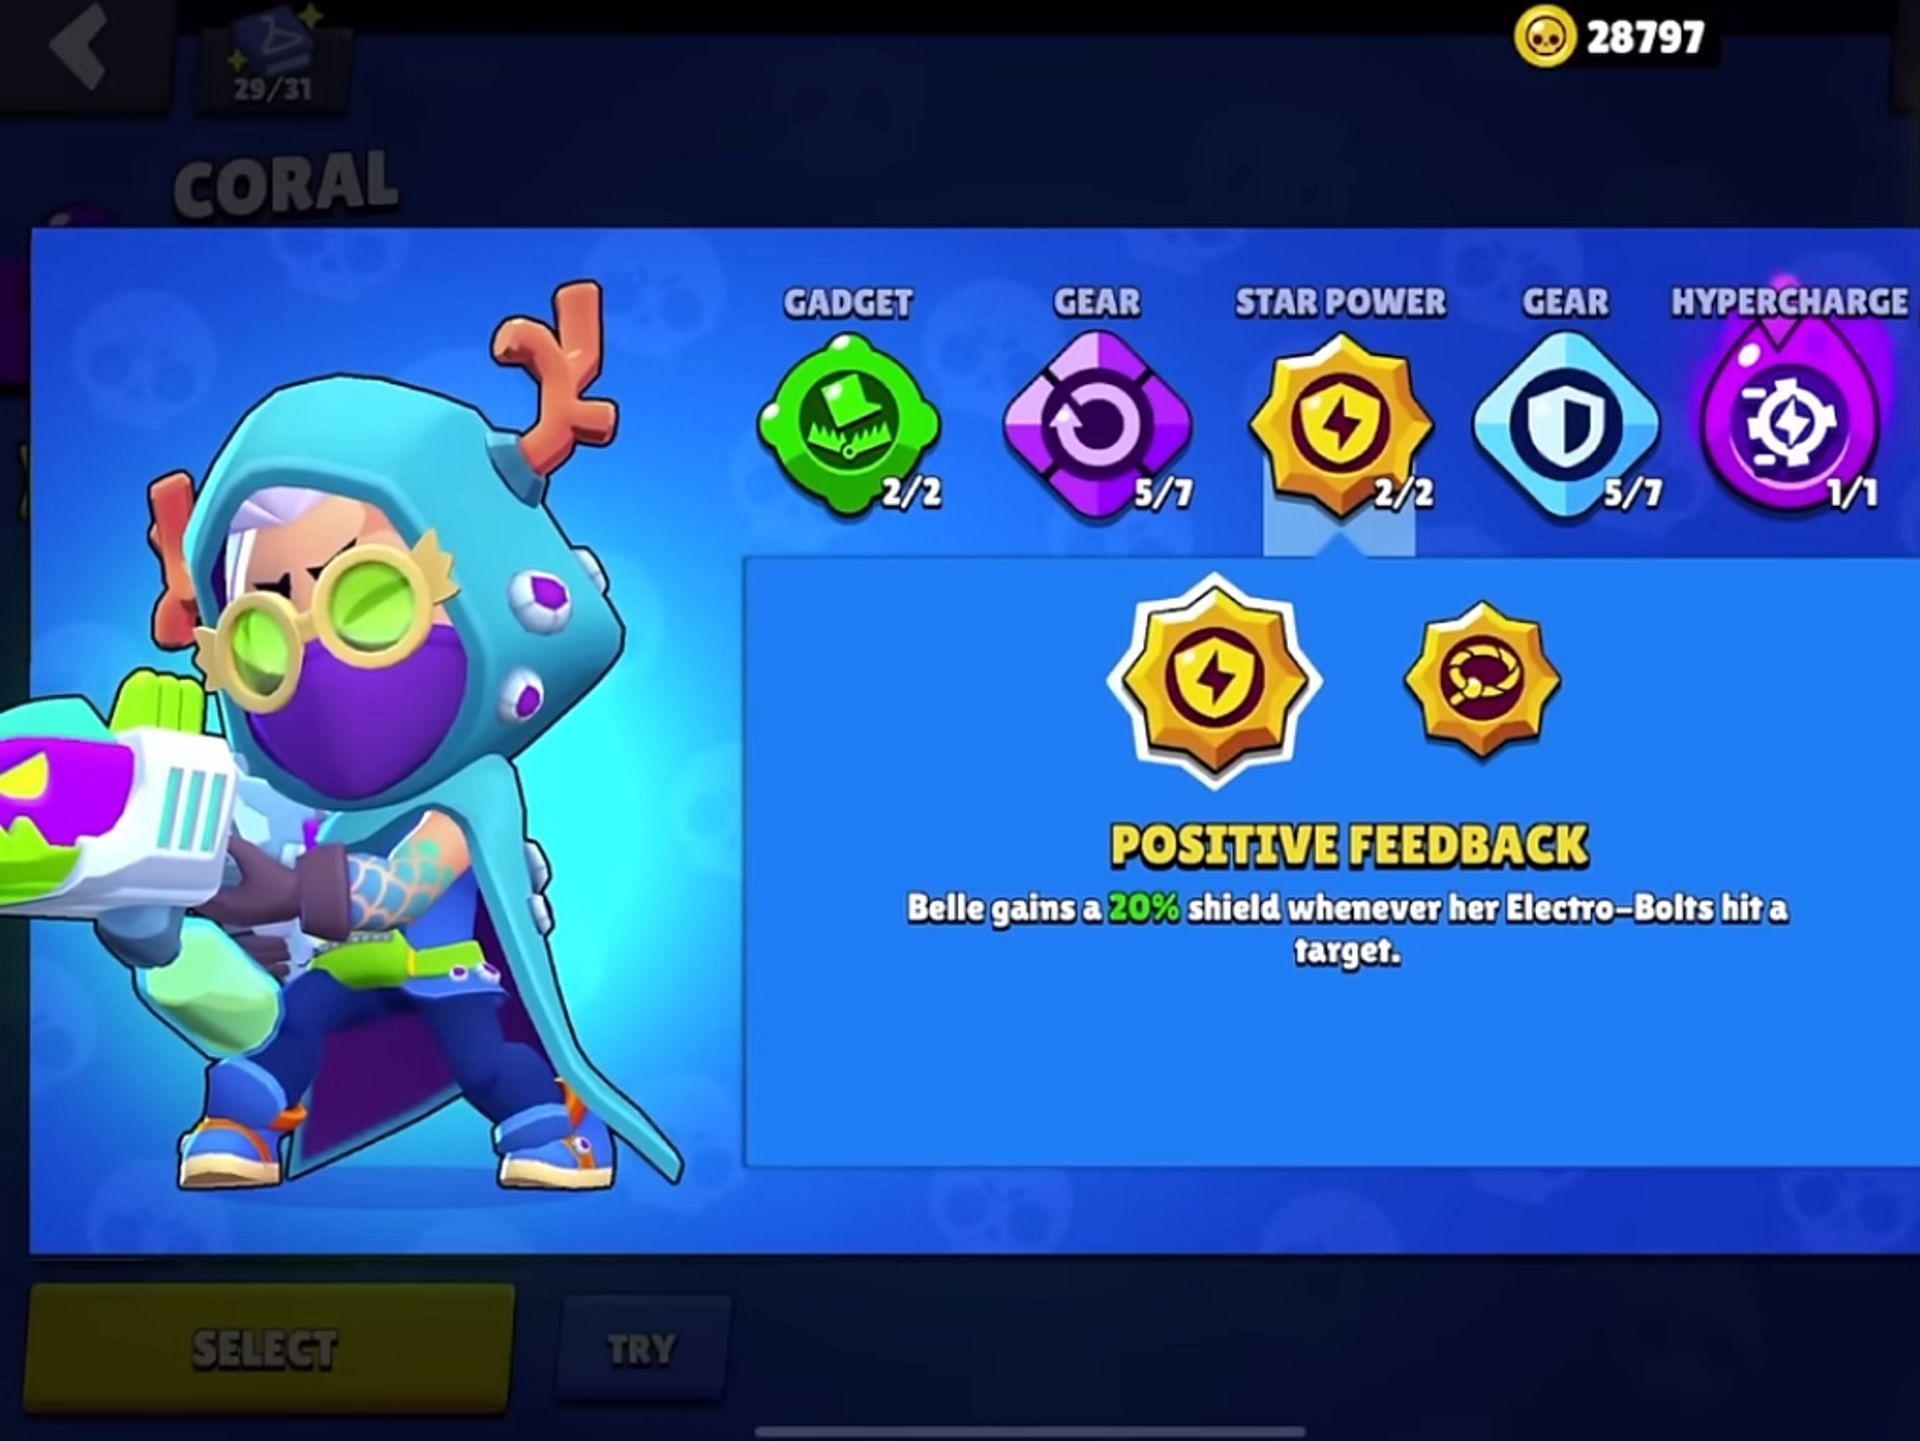 Positive Feedback Star Power (Image via Supercell)